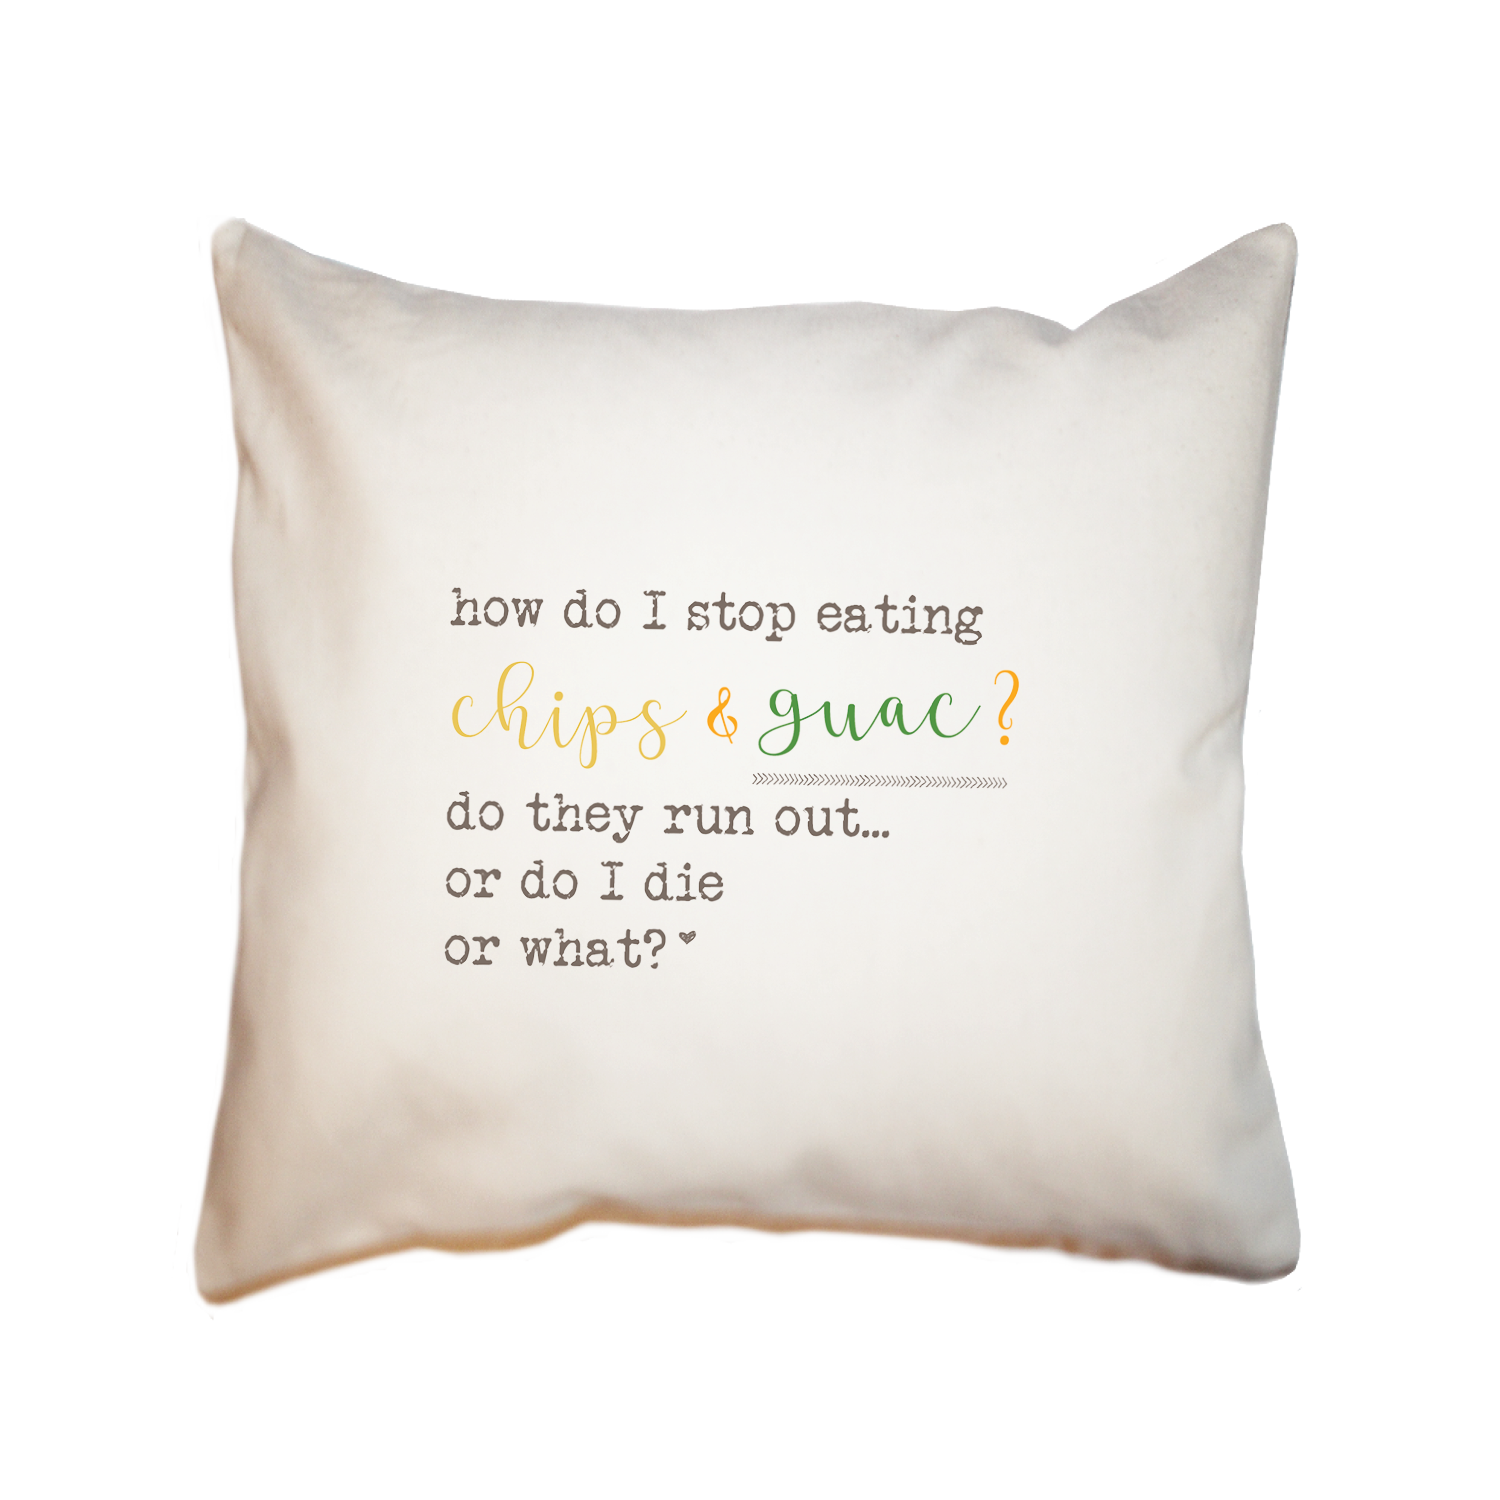 chips and guac square pillow